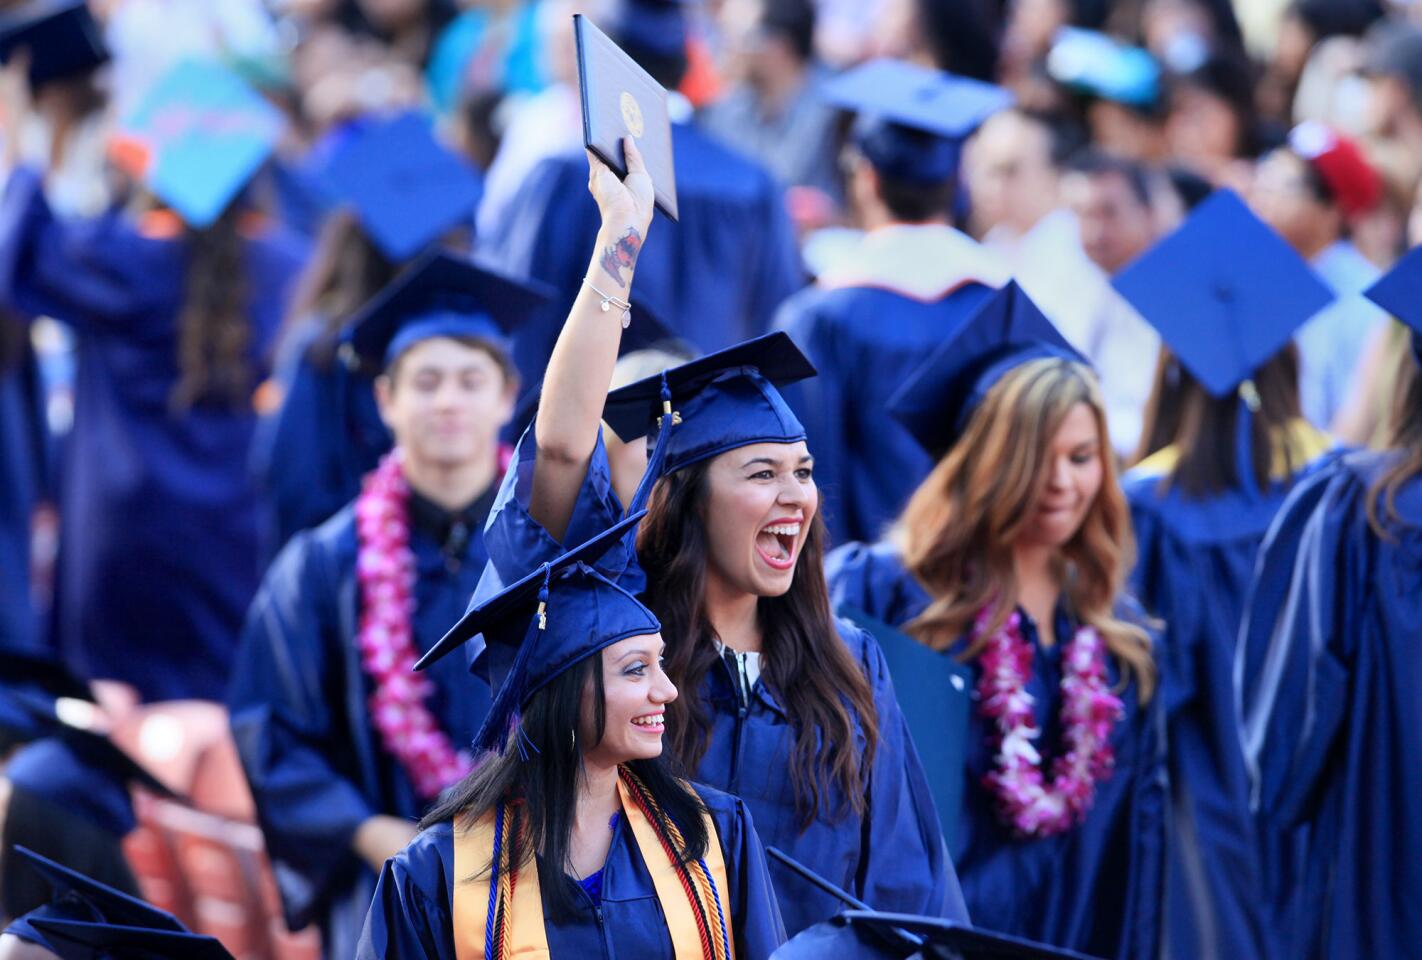 Sheaya Marie Rojas, center, cheers as she waves her diploma in the air during Orange Coast College's 66th Commencement Ceremony on Wednesday at Pacific Amphitheatre in Costa Mesa. Rojas earned her Associates in Science degree by studying Neurodiagnostic Technology. (Kevin Chang/ Daily Pilot)